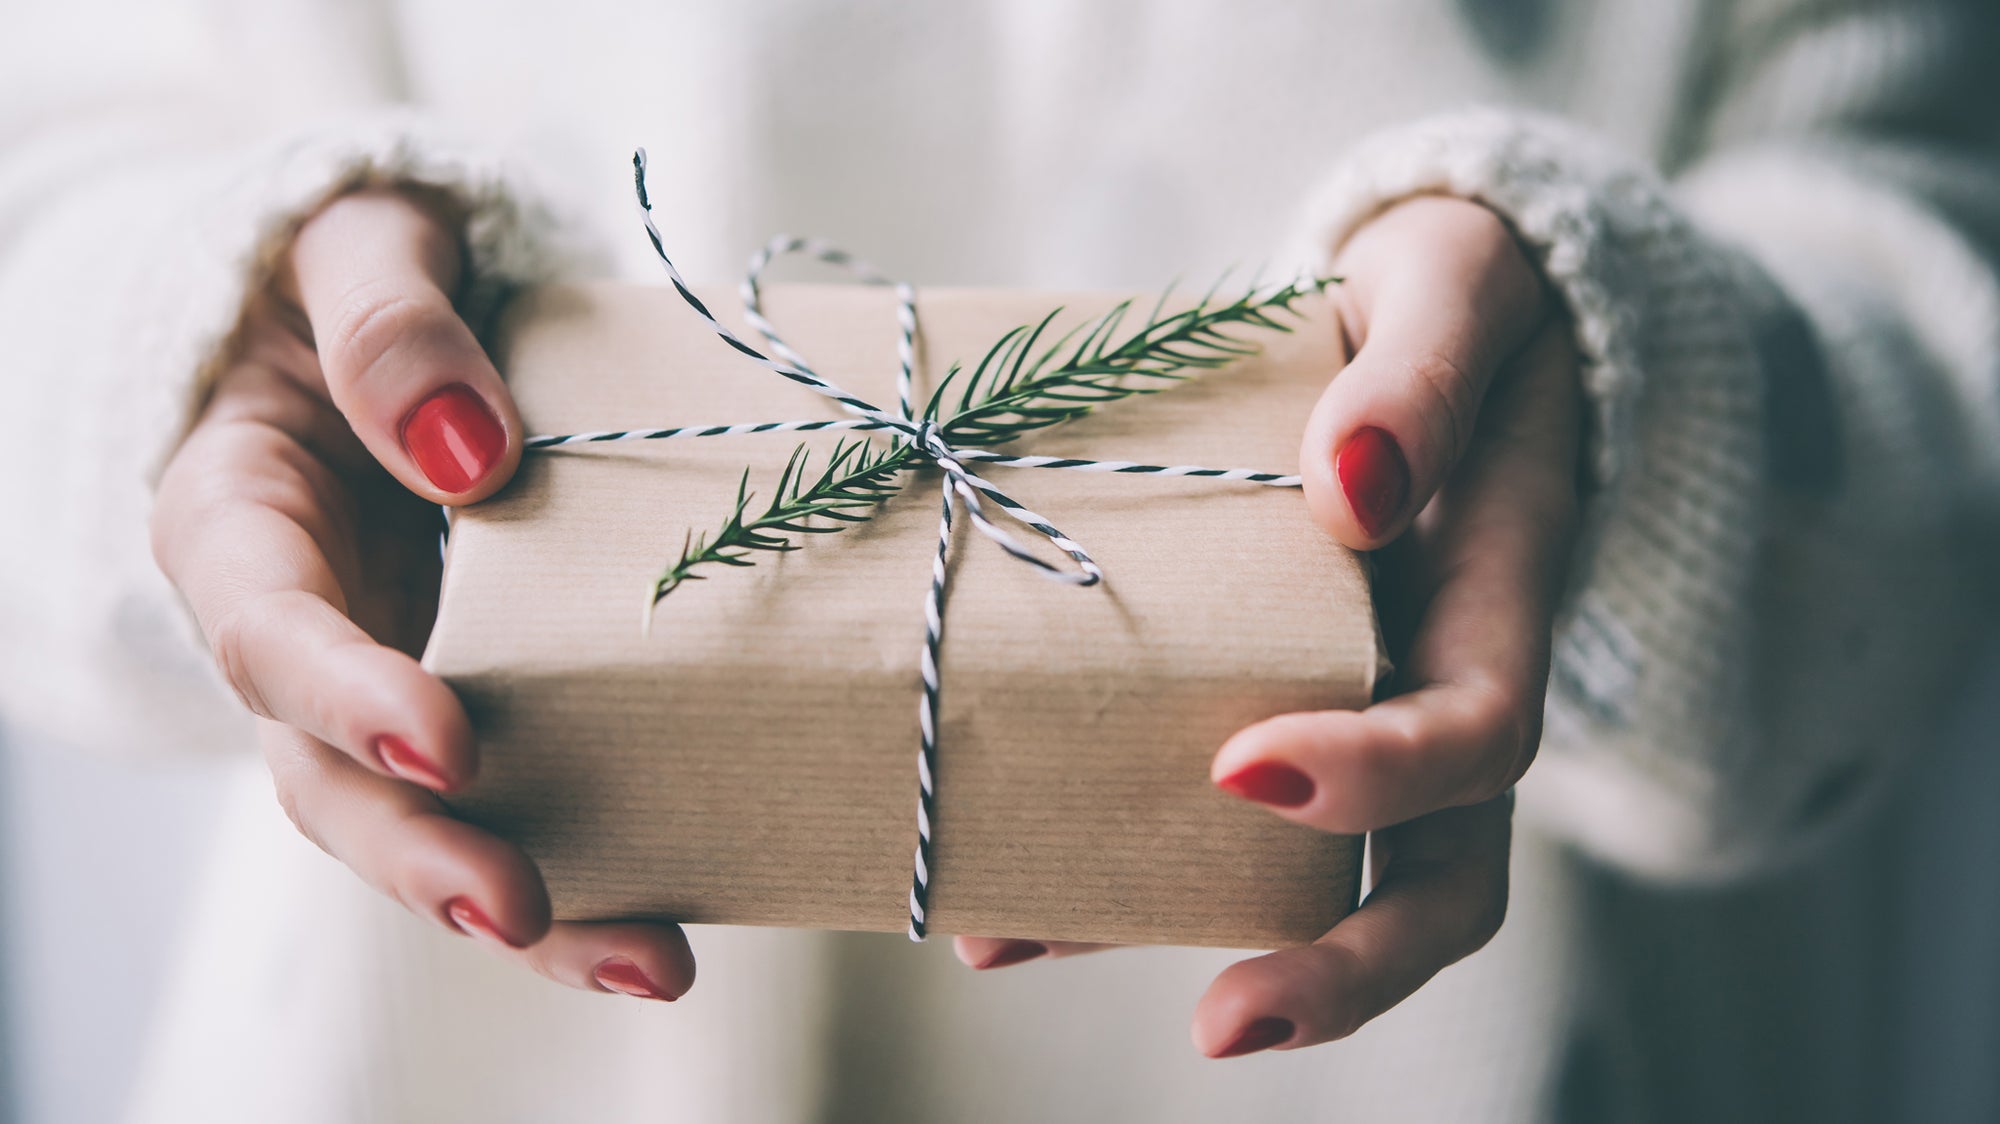 Best Christmas Gift Ideas For Someone With Arthritis And Pain